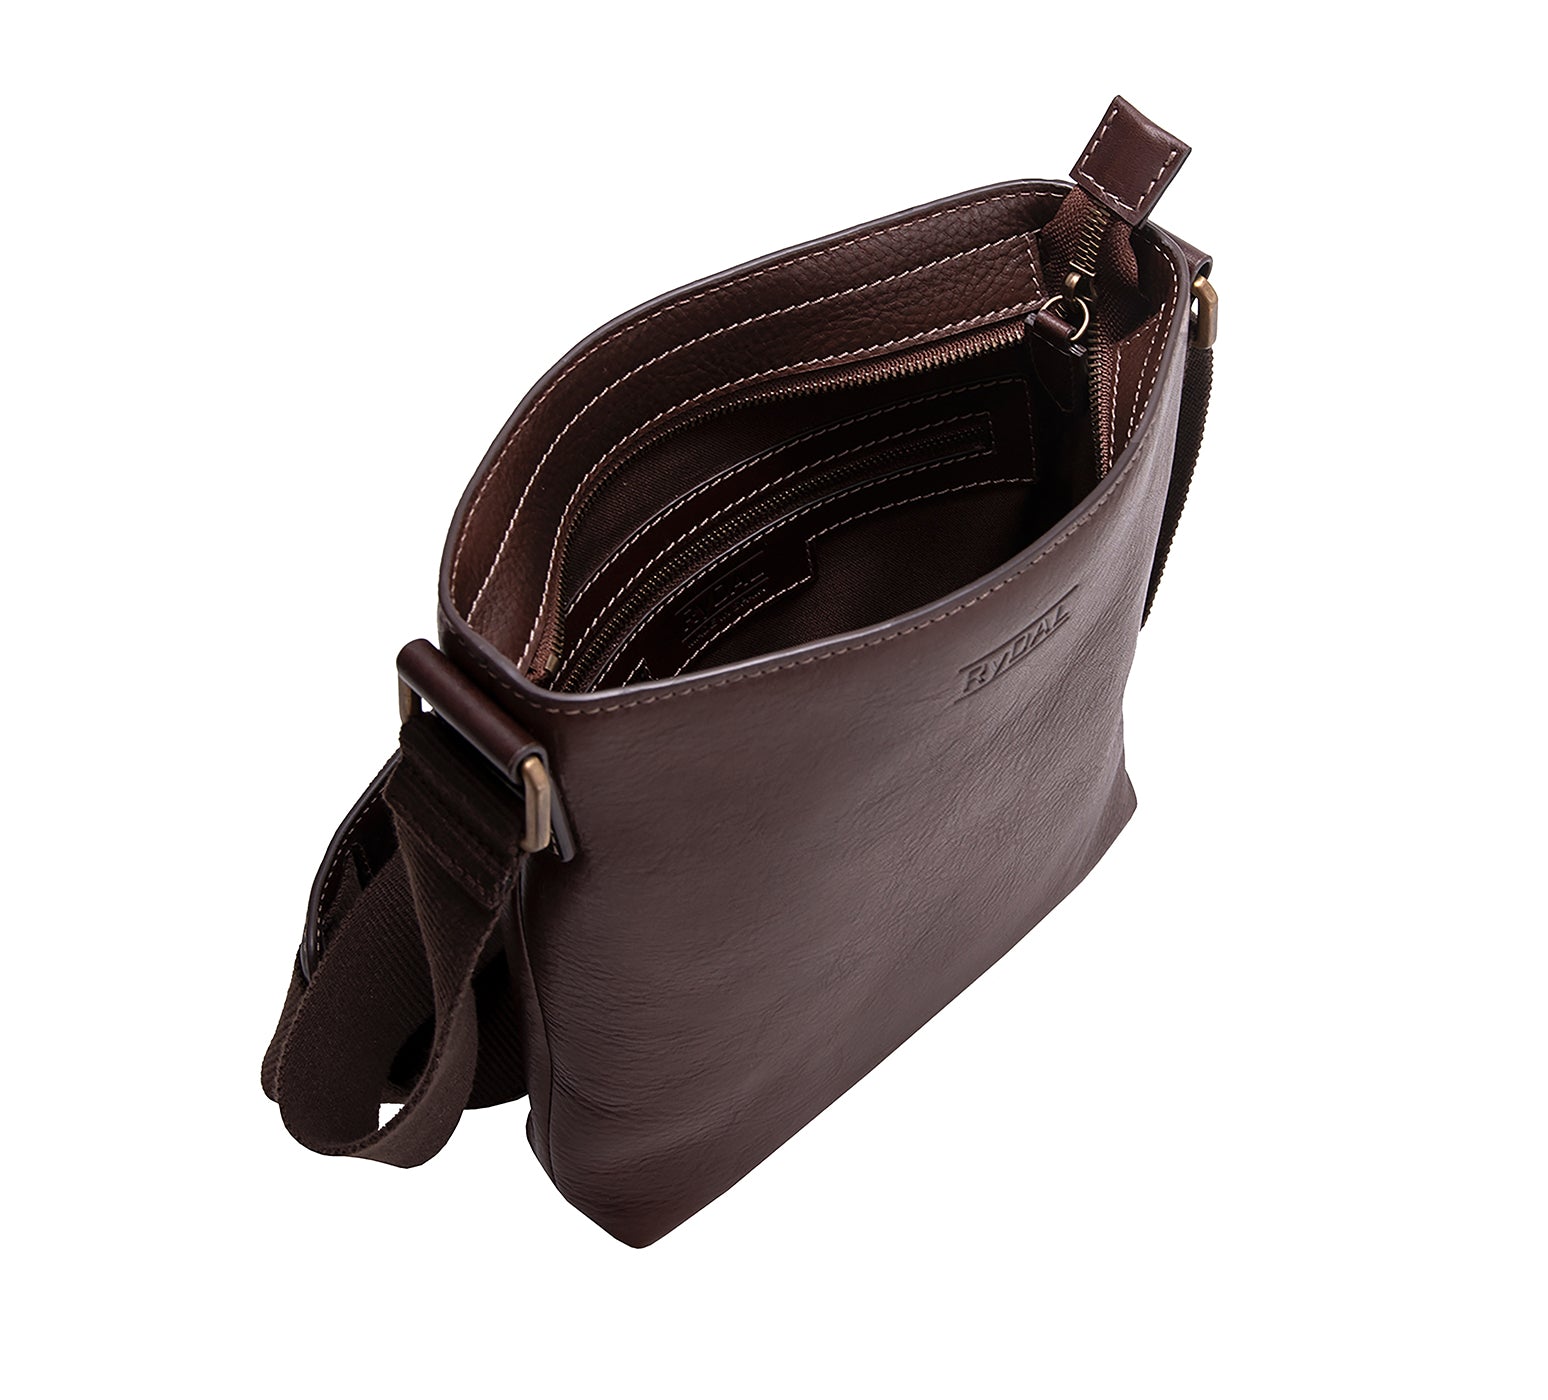 The Lucca Mens Leather Shoulder Bag from Rydal in 'Dark Brown' showing interior.